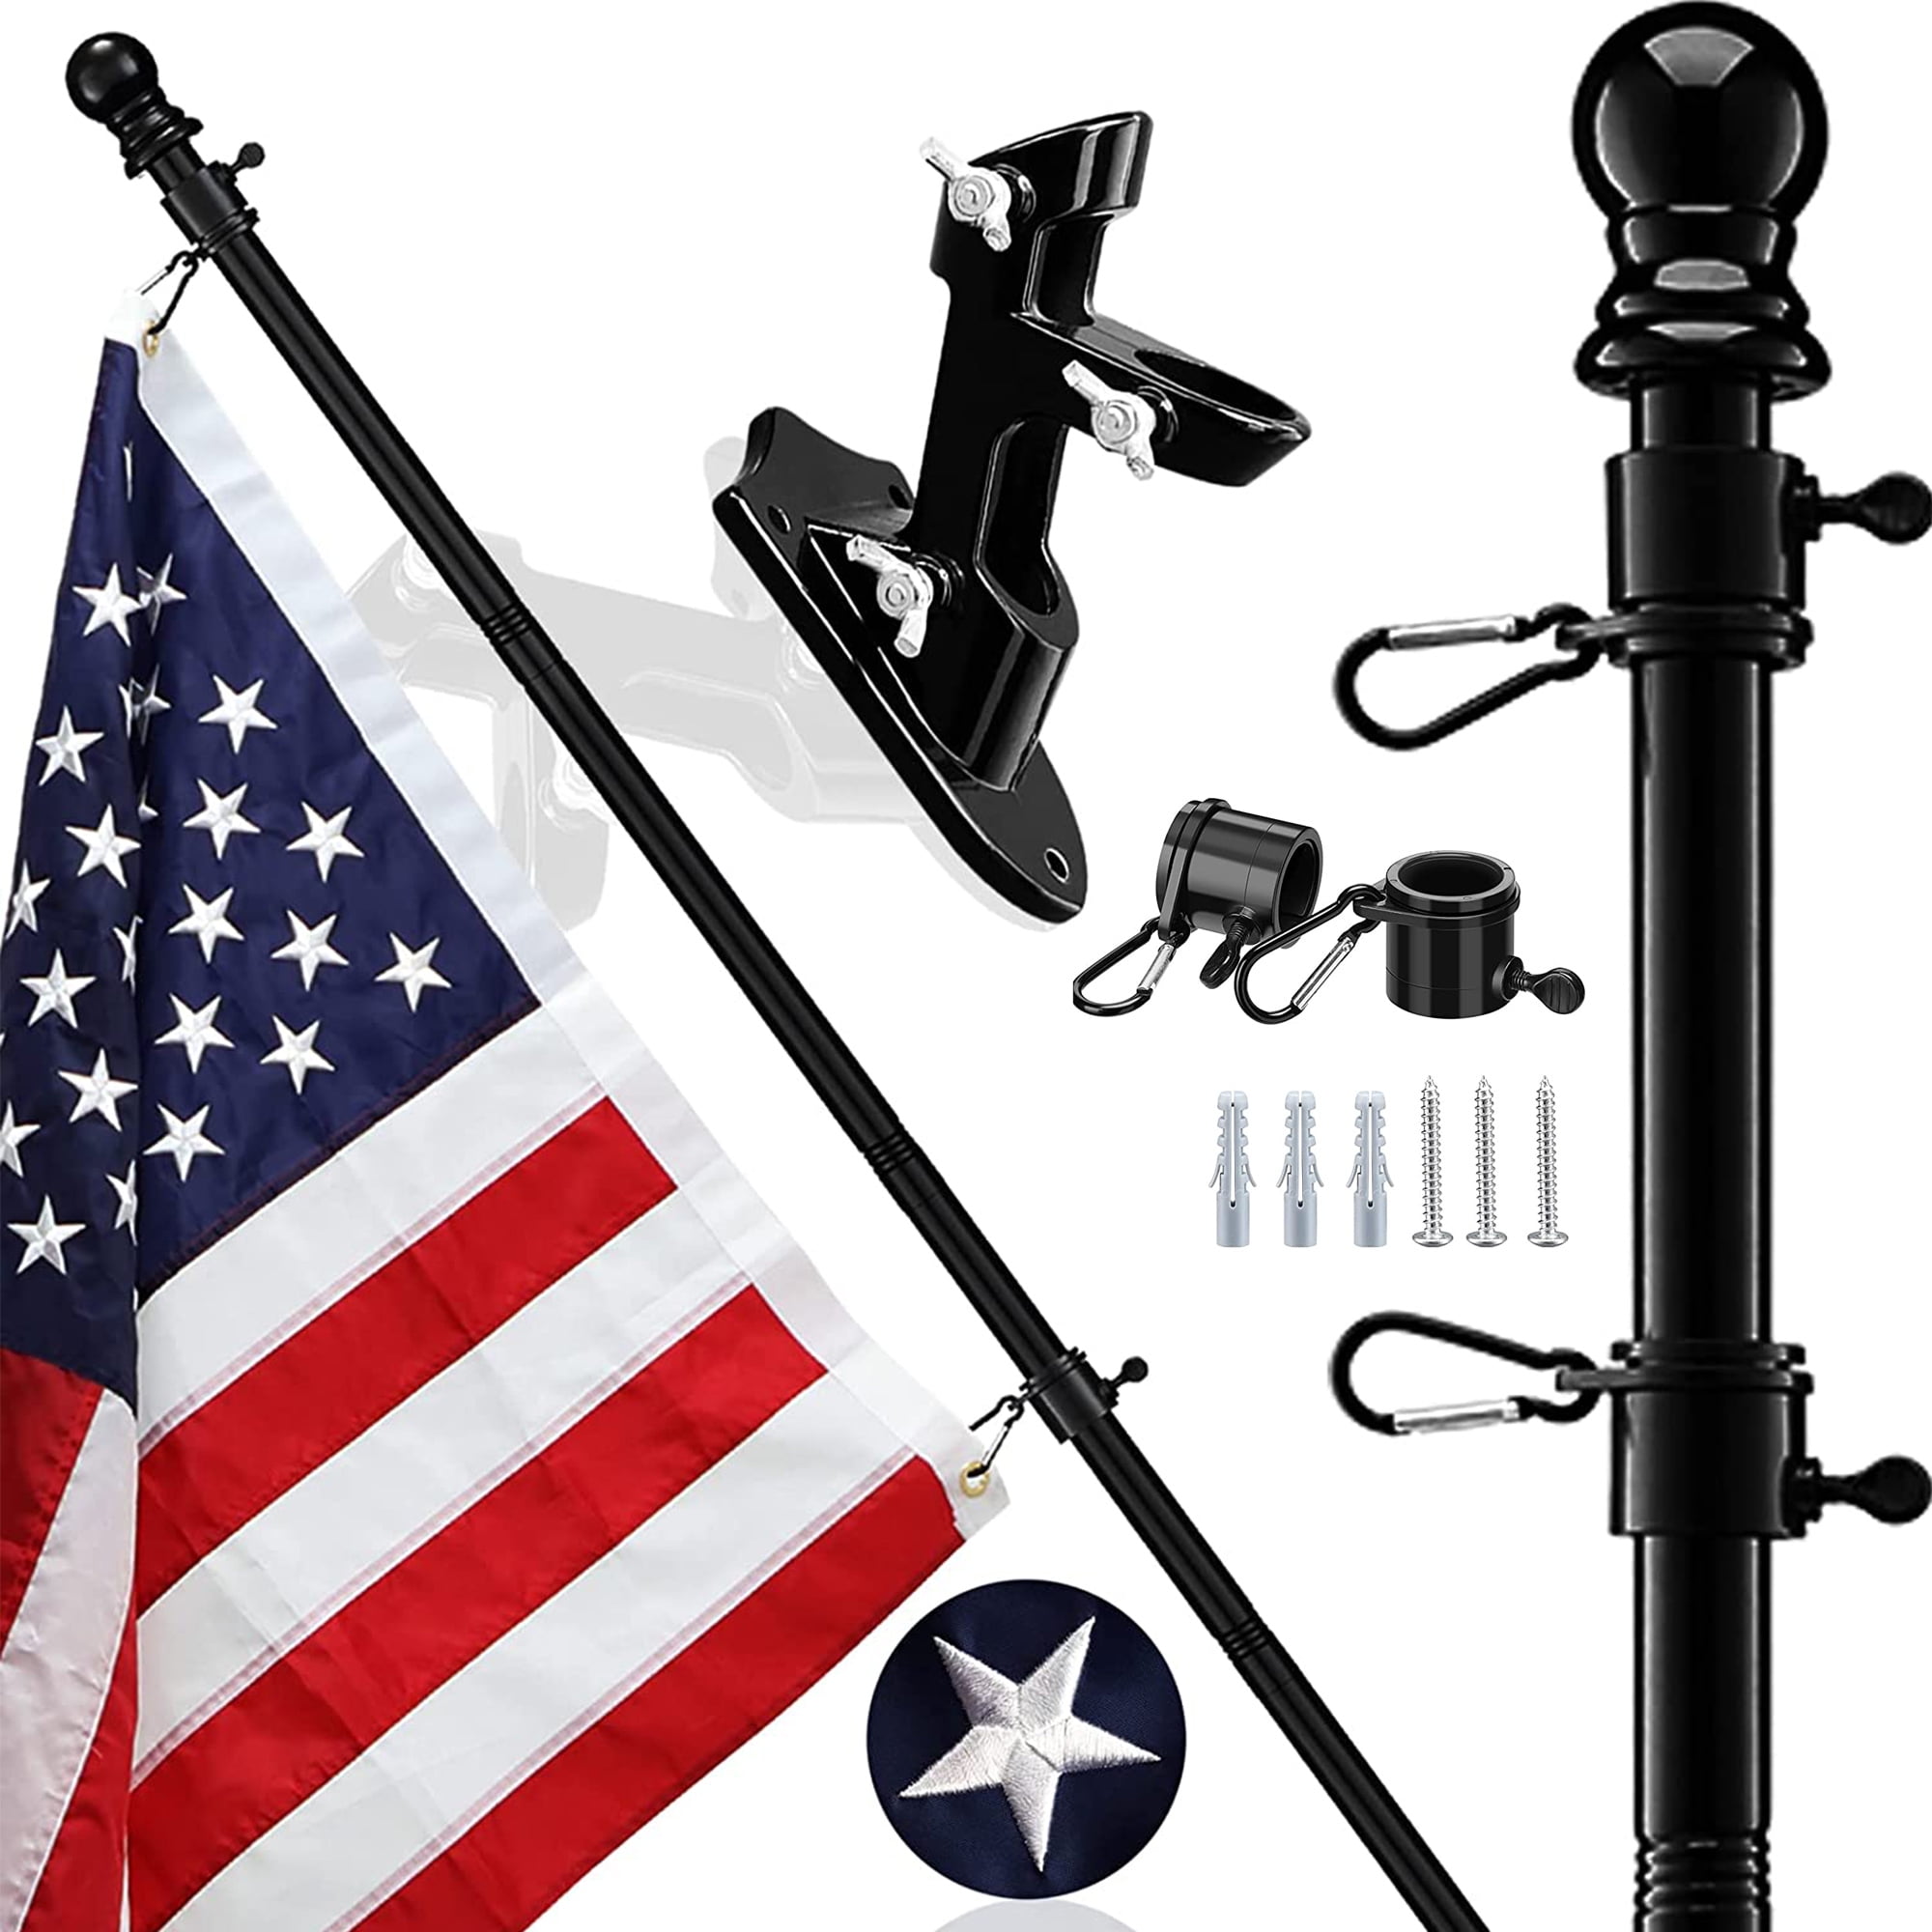 Flag Pole Kit Adjustable Residential Flag Poles with Flag Pole Bracket for House Yard Suitable for 3x5 and 4x6 Flags Silver 6FT Flagpole Kit for American Flag 